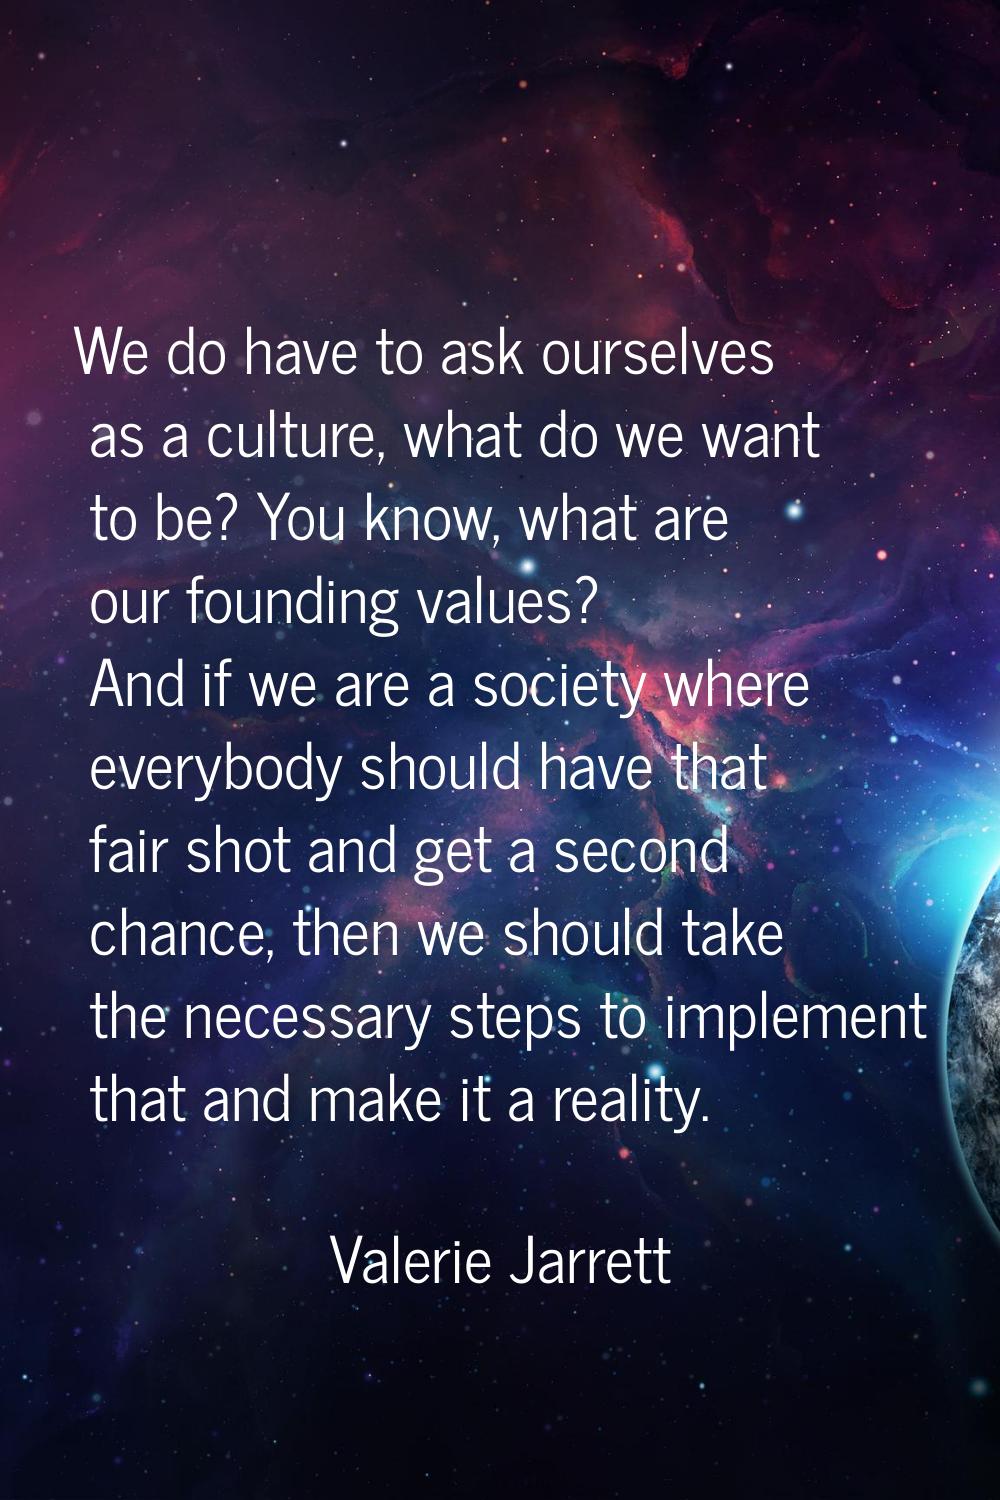 We do have to ask ourselves as a culture, what do we want to be? You know, what are our founding va